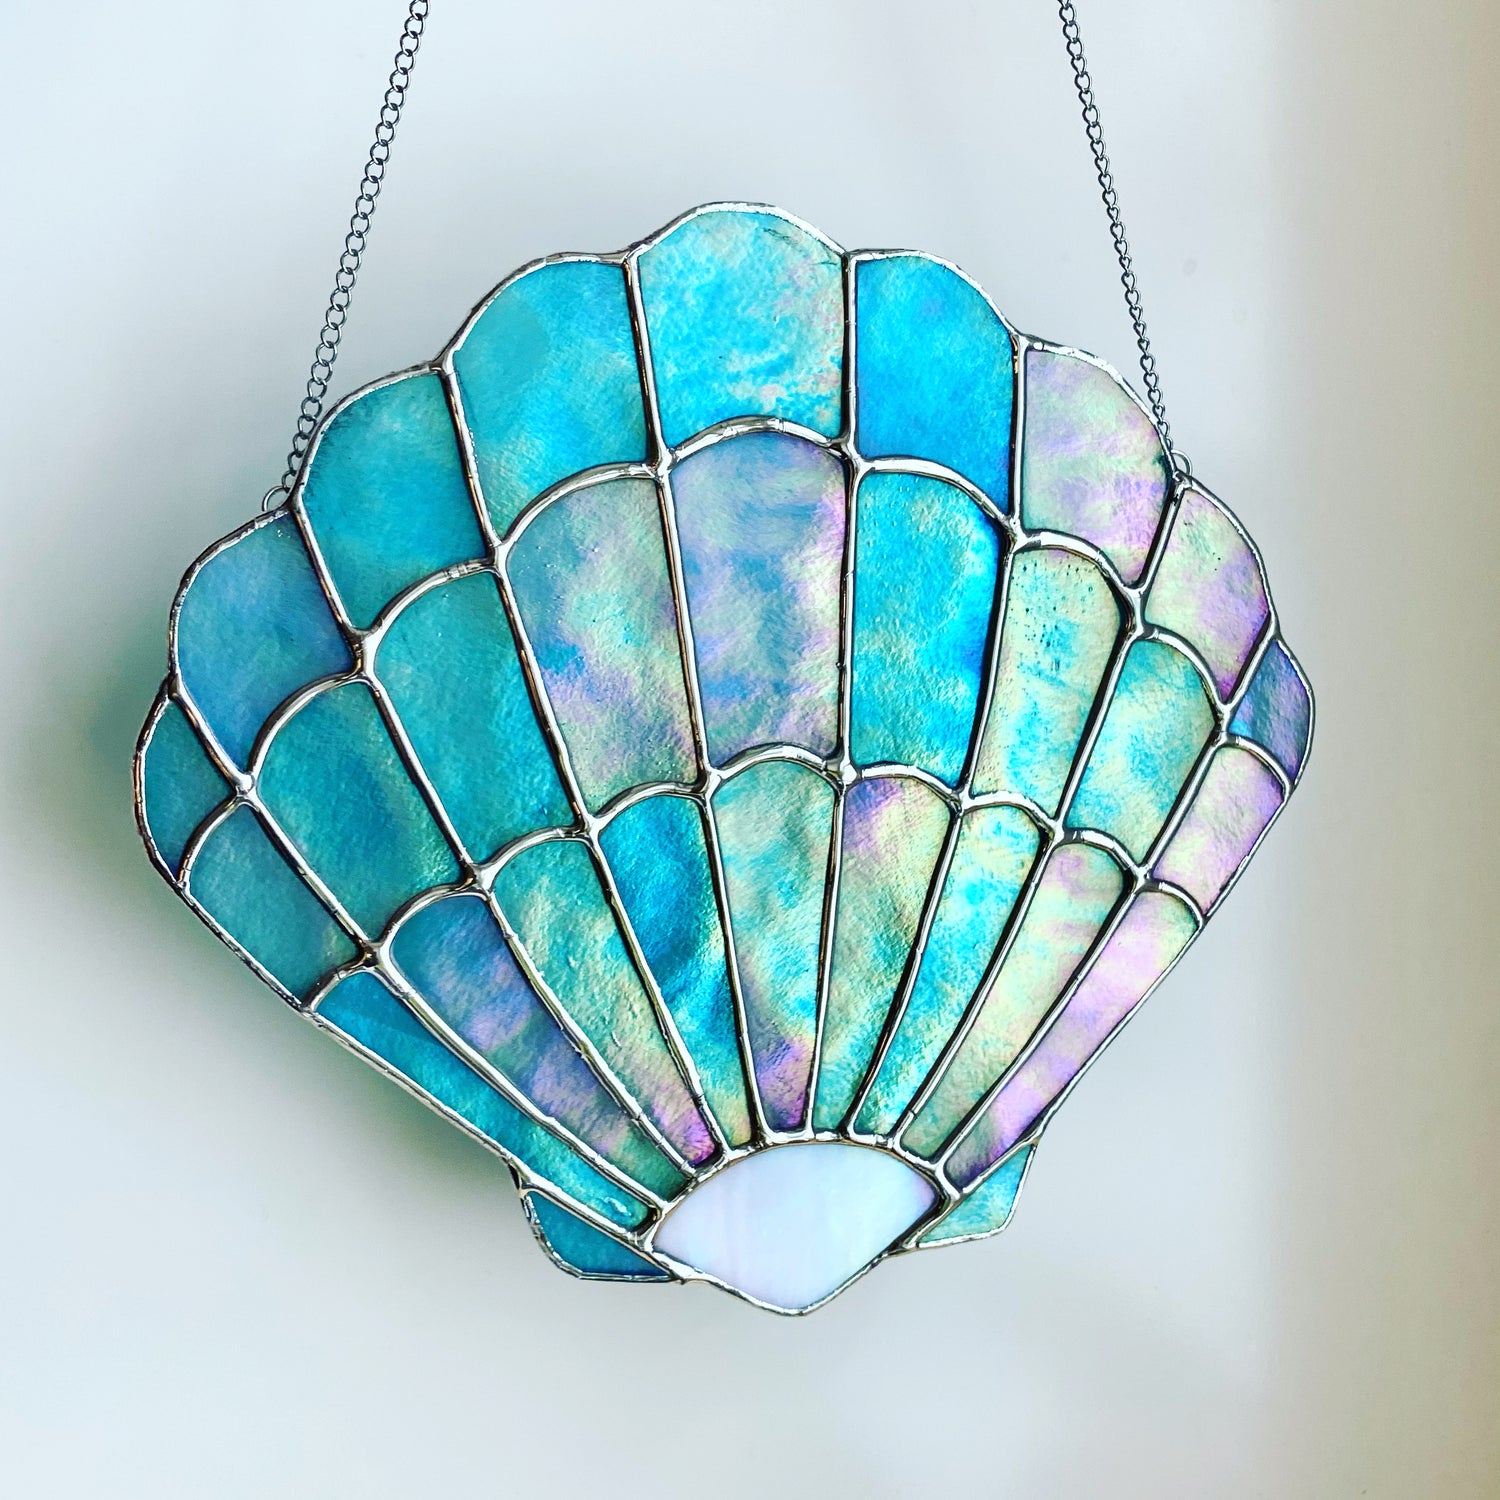 stained glass iridescent teal sea shell